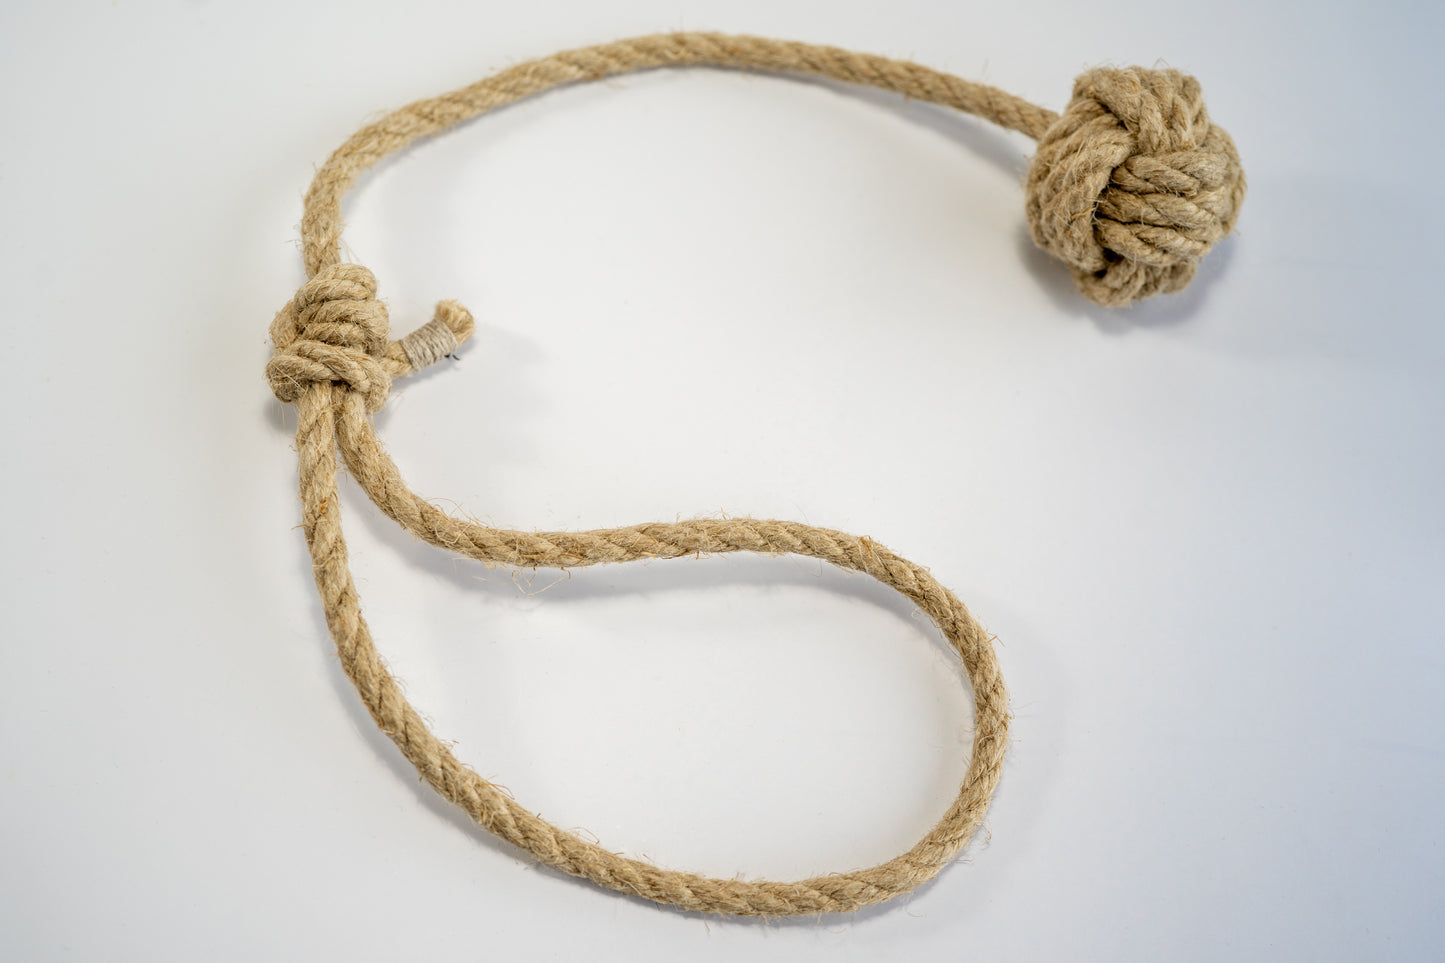 Hemp rope with small monkey fist for dogs.